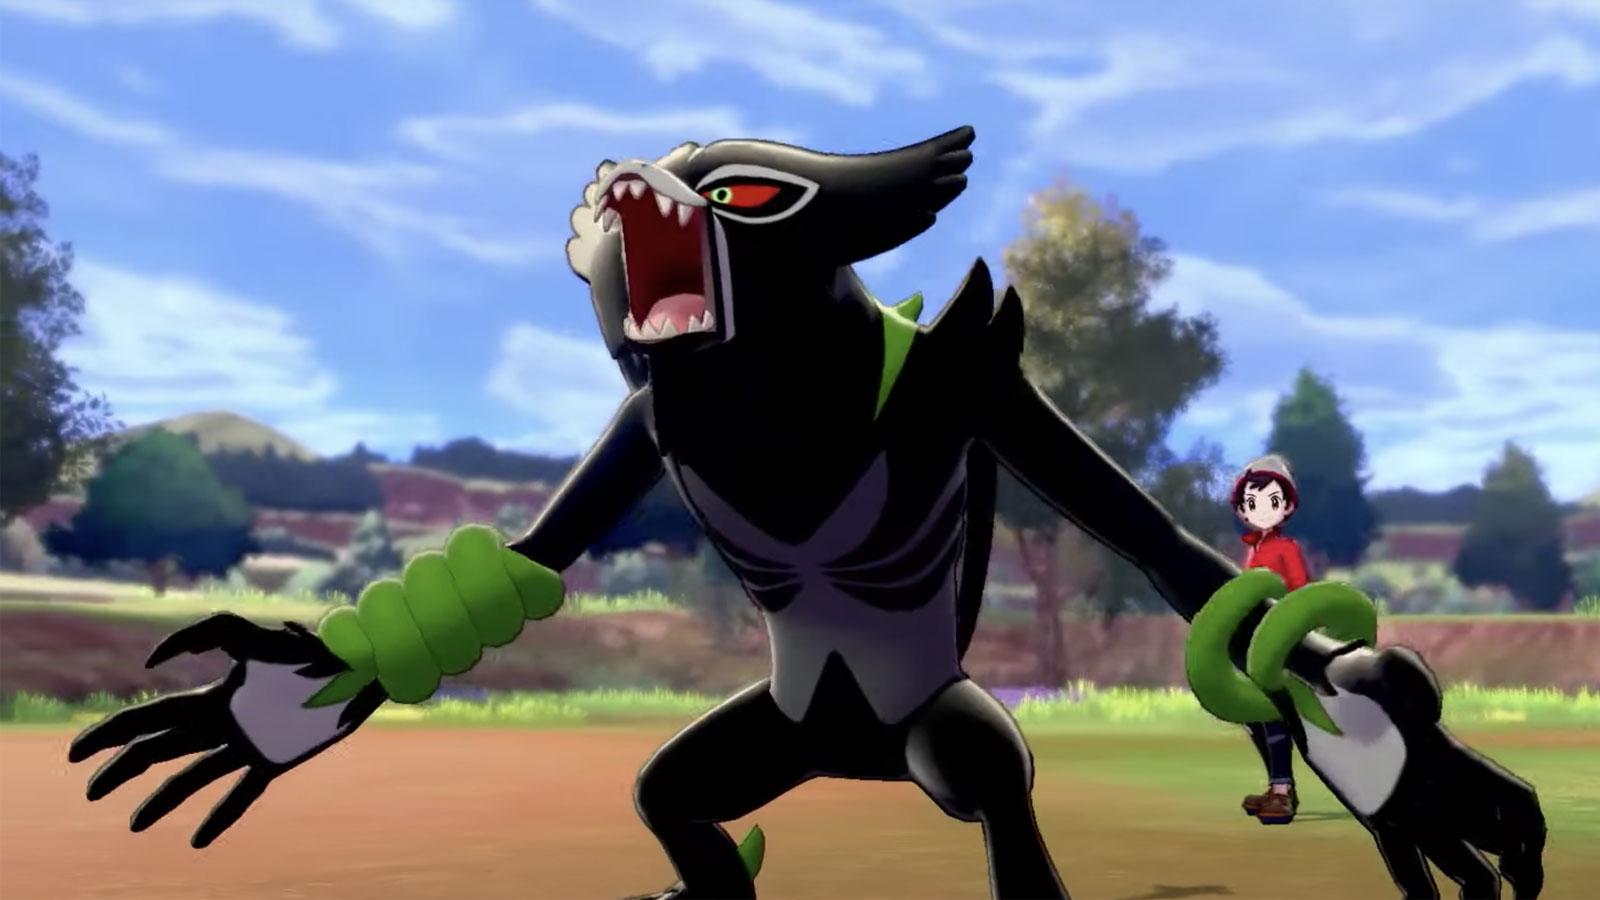 Pokemon Sword & Shield players outraged over new Zarude form - Dexerto